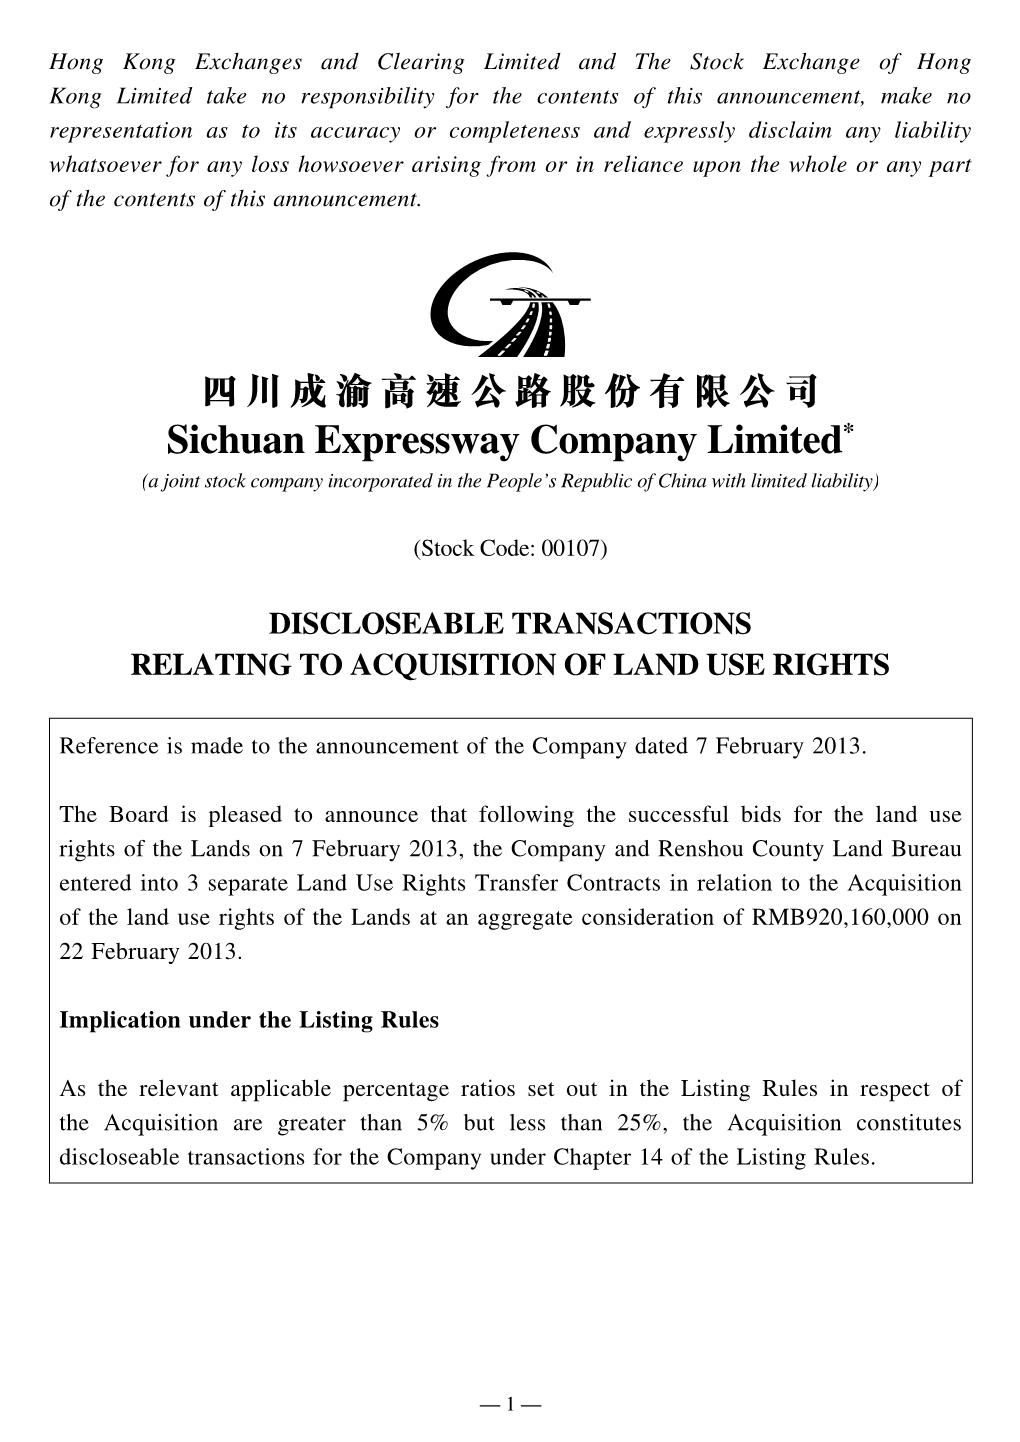 Discloseable Transactions Relating to Acquisition of Land Use Rights